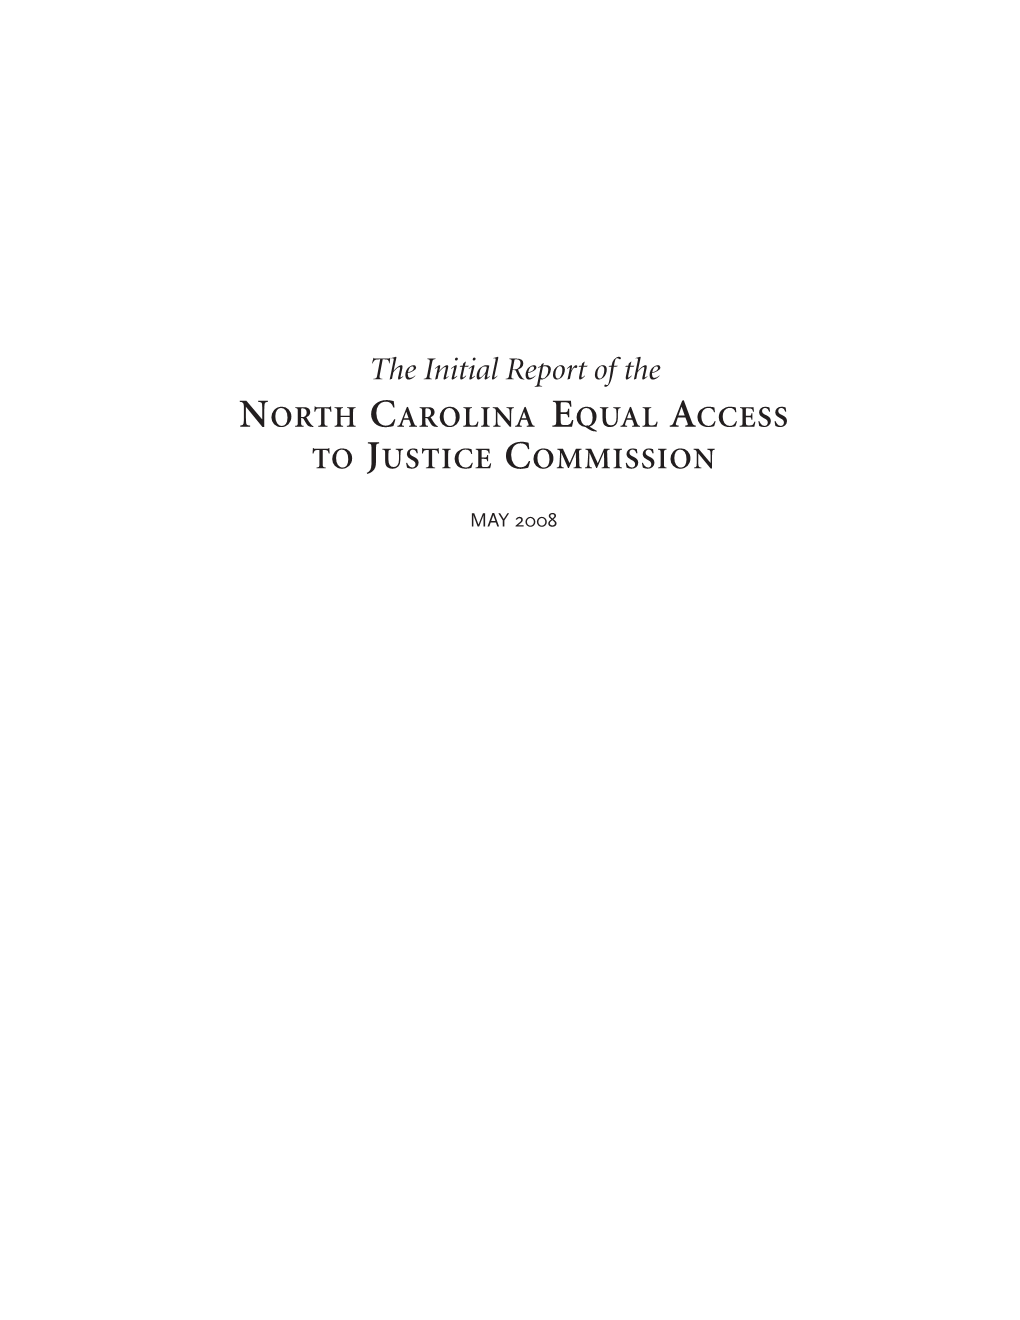 Initial Report of the NORTH CAROLINA EQUAL ACCESS to JUSTICE COMMISSION